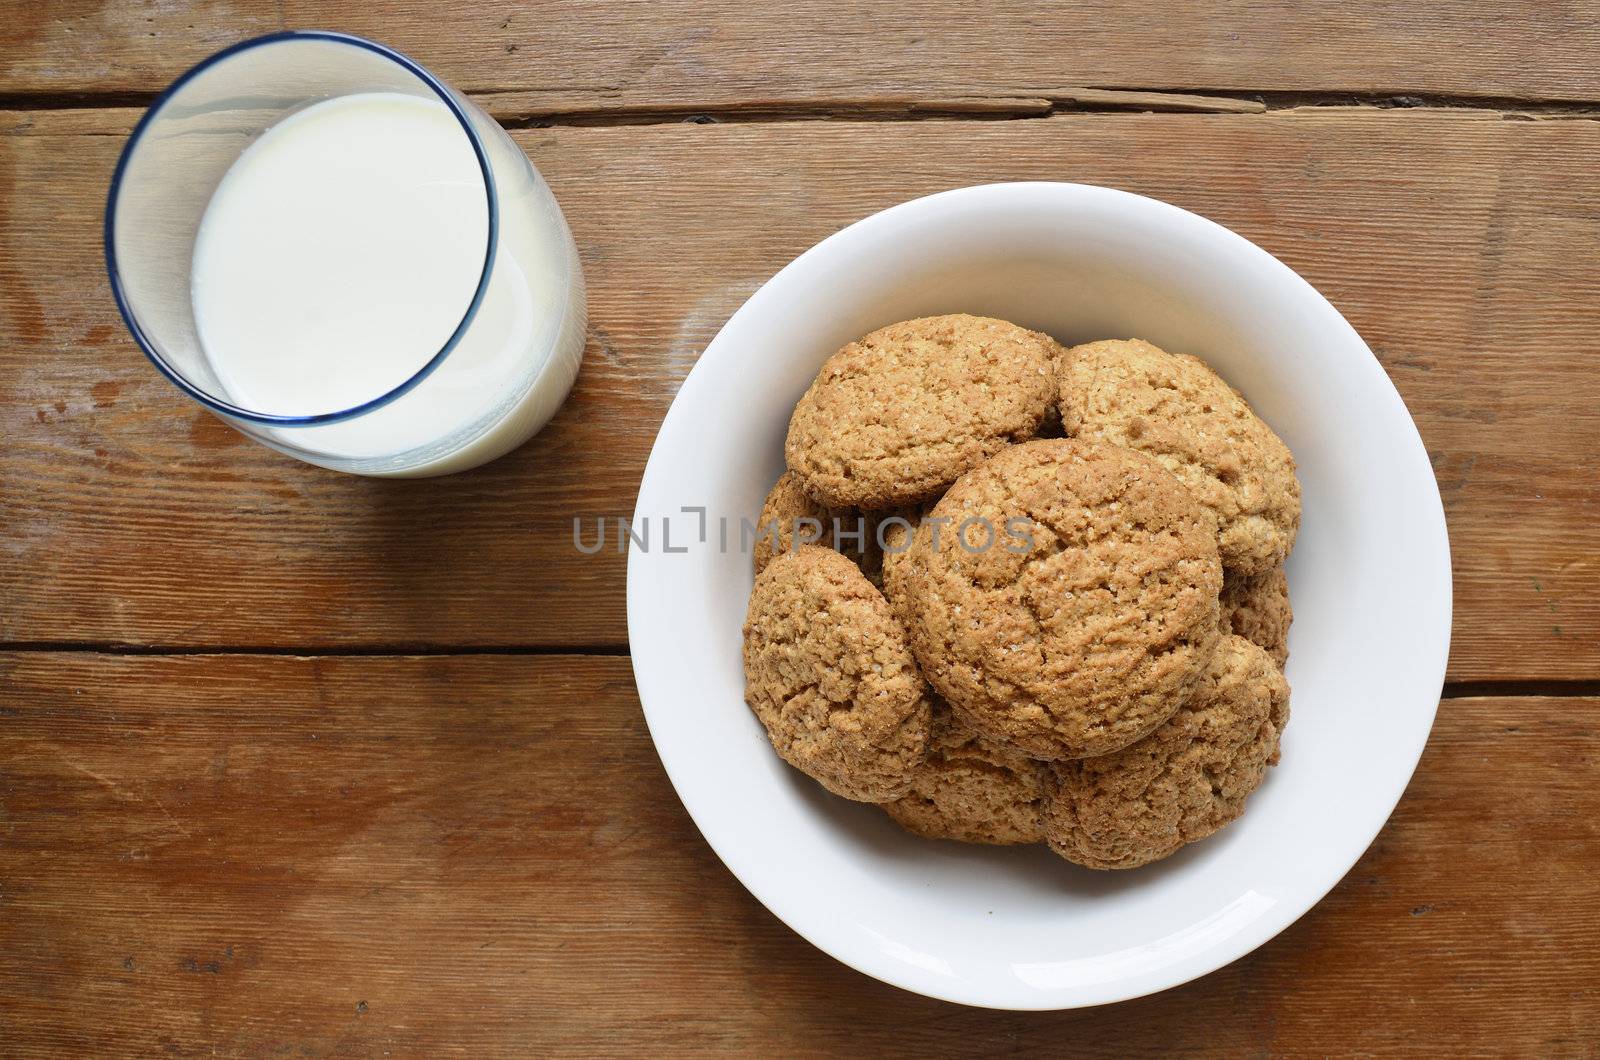 white plate with oat cookies and glass with milk on wooden table
